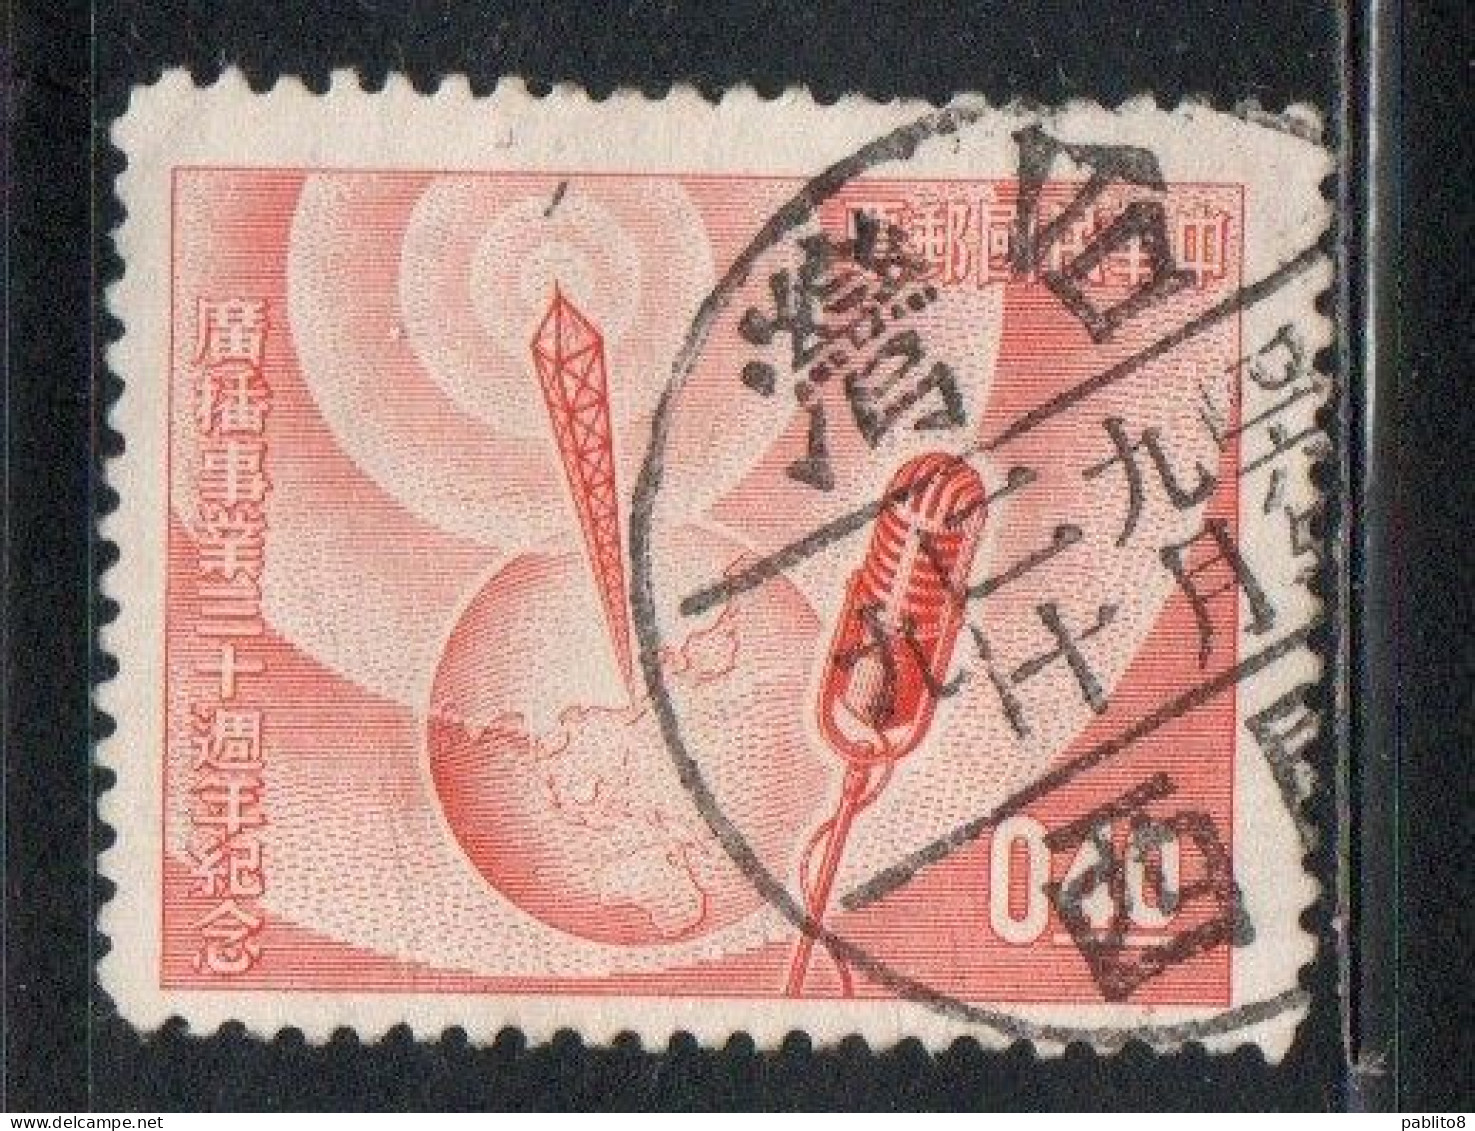 CHINA REPUBLIC CINA TAIWAN FORMOSA 1957 CHINESE BROADCASTING GLOBE RADIO TOWER MICROFONE 40c USED USATO OBLITERE' - Used Stamps